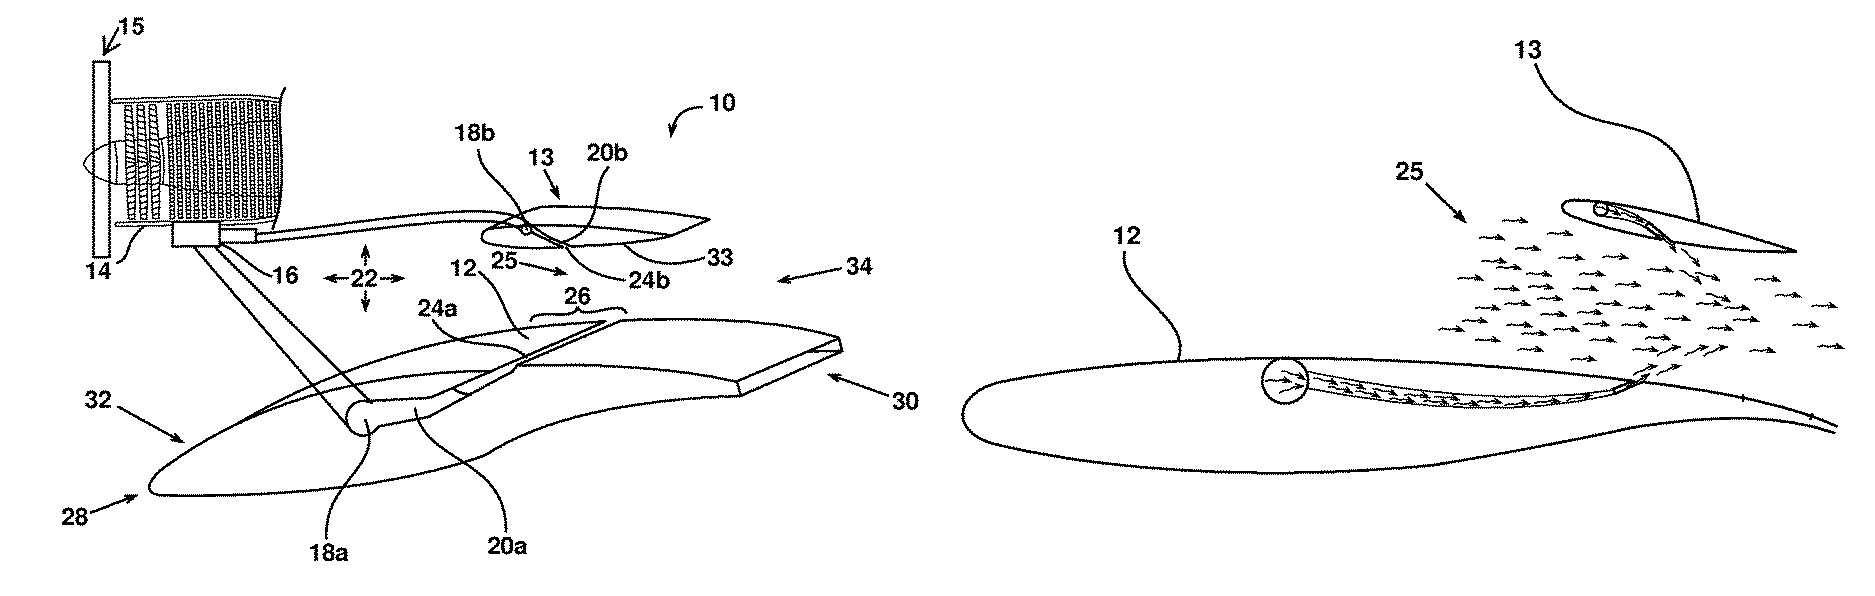 Augmented propulsion system with boundary layer suction and wake blowing